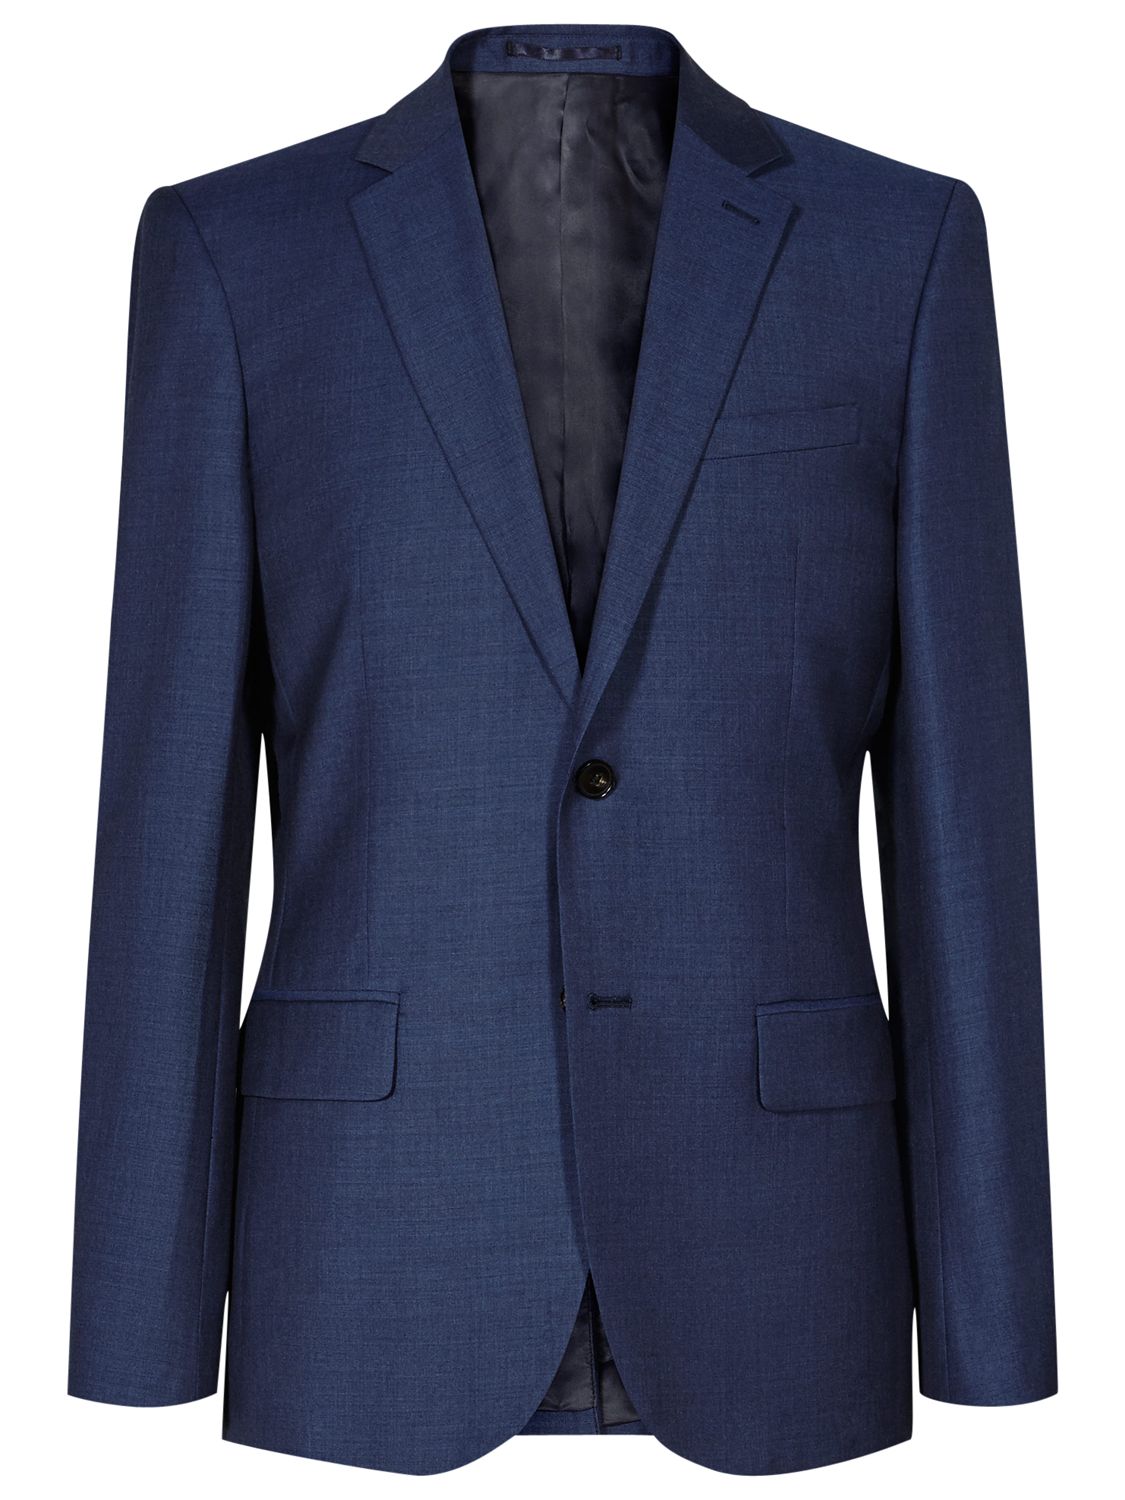 Reiss Harry Modern Fit Suit Jacket, Airforce Blue